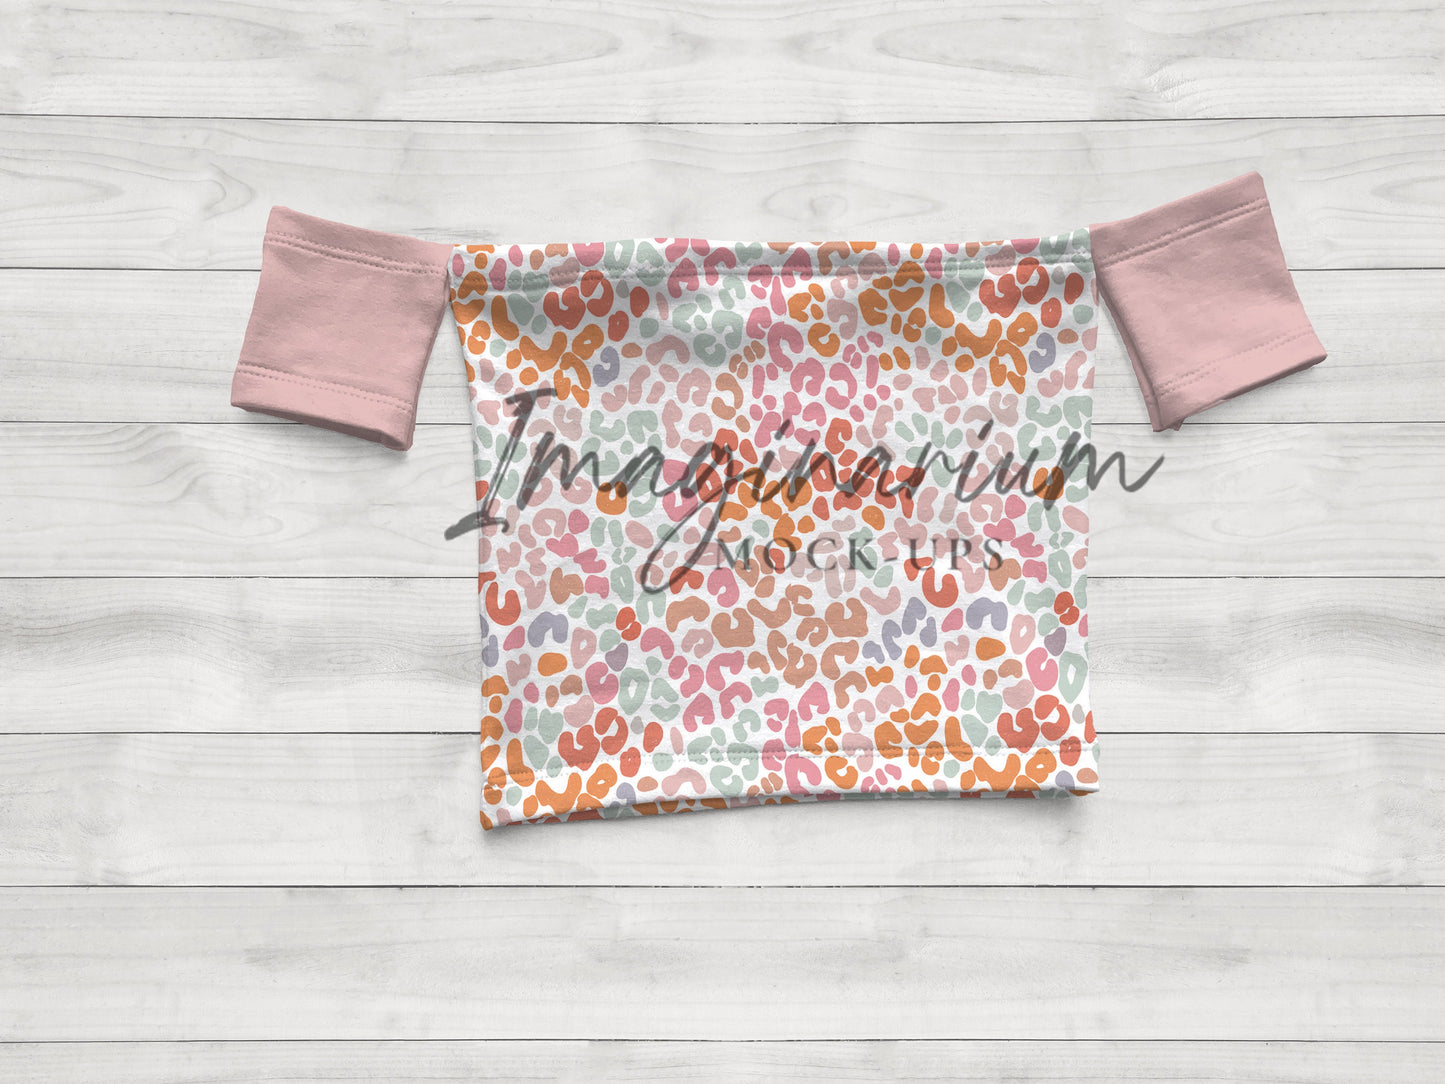 Tube Top with Optional Sleeves Mock Up, Realistic Mockup for Photoshop and Procreate